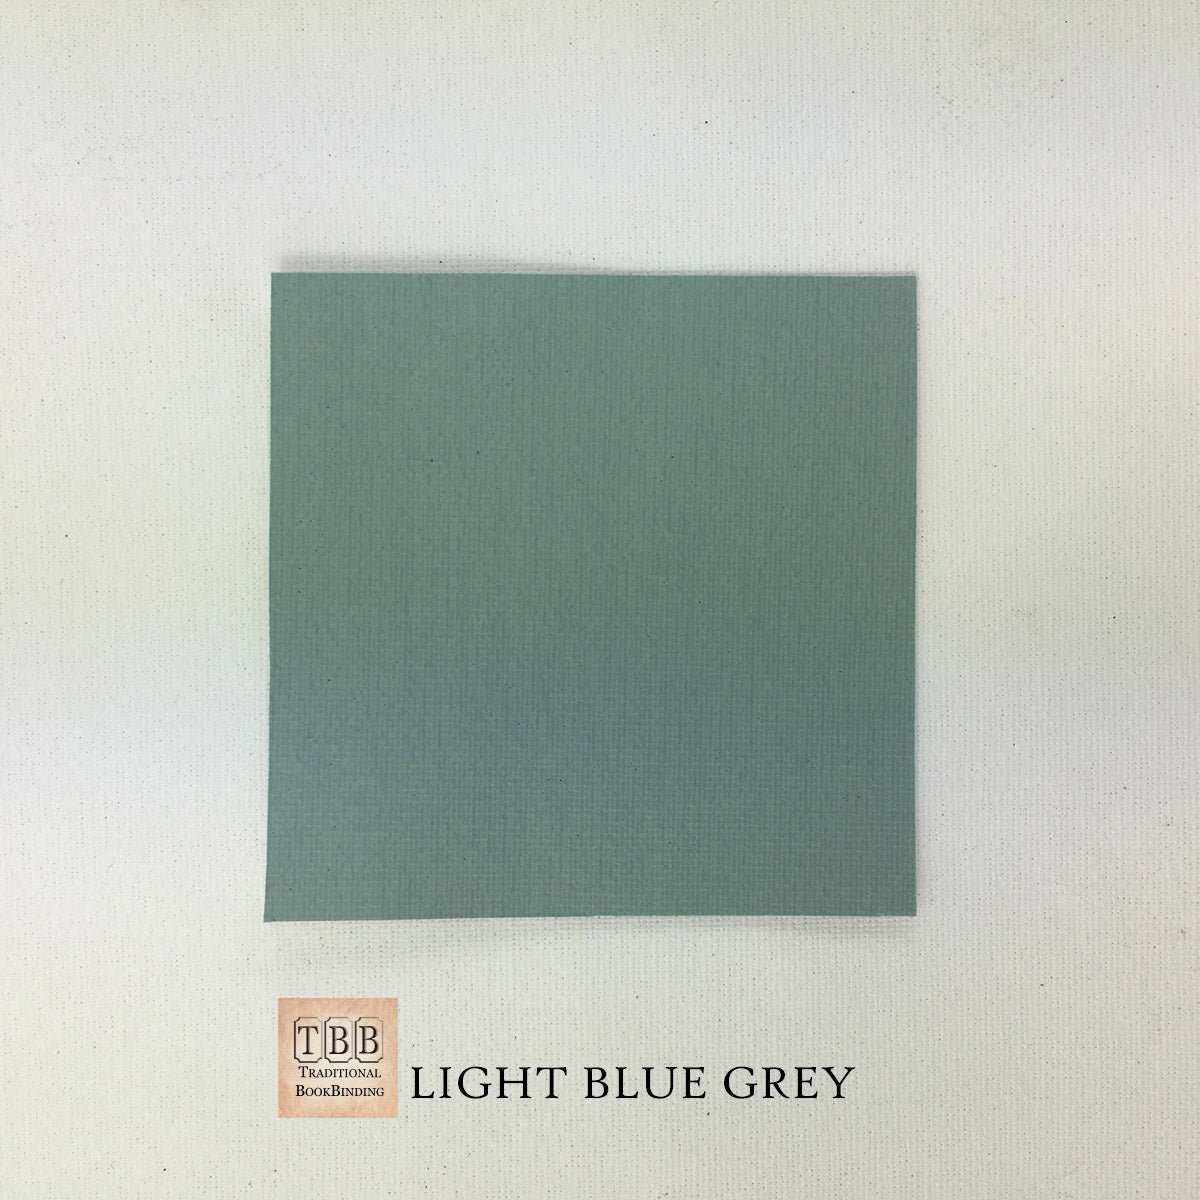 Classic Premium Fine Buckram- Durable bookbinding cloth with paper backing- Light Blue Grey- TBBP16